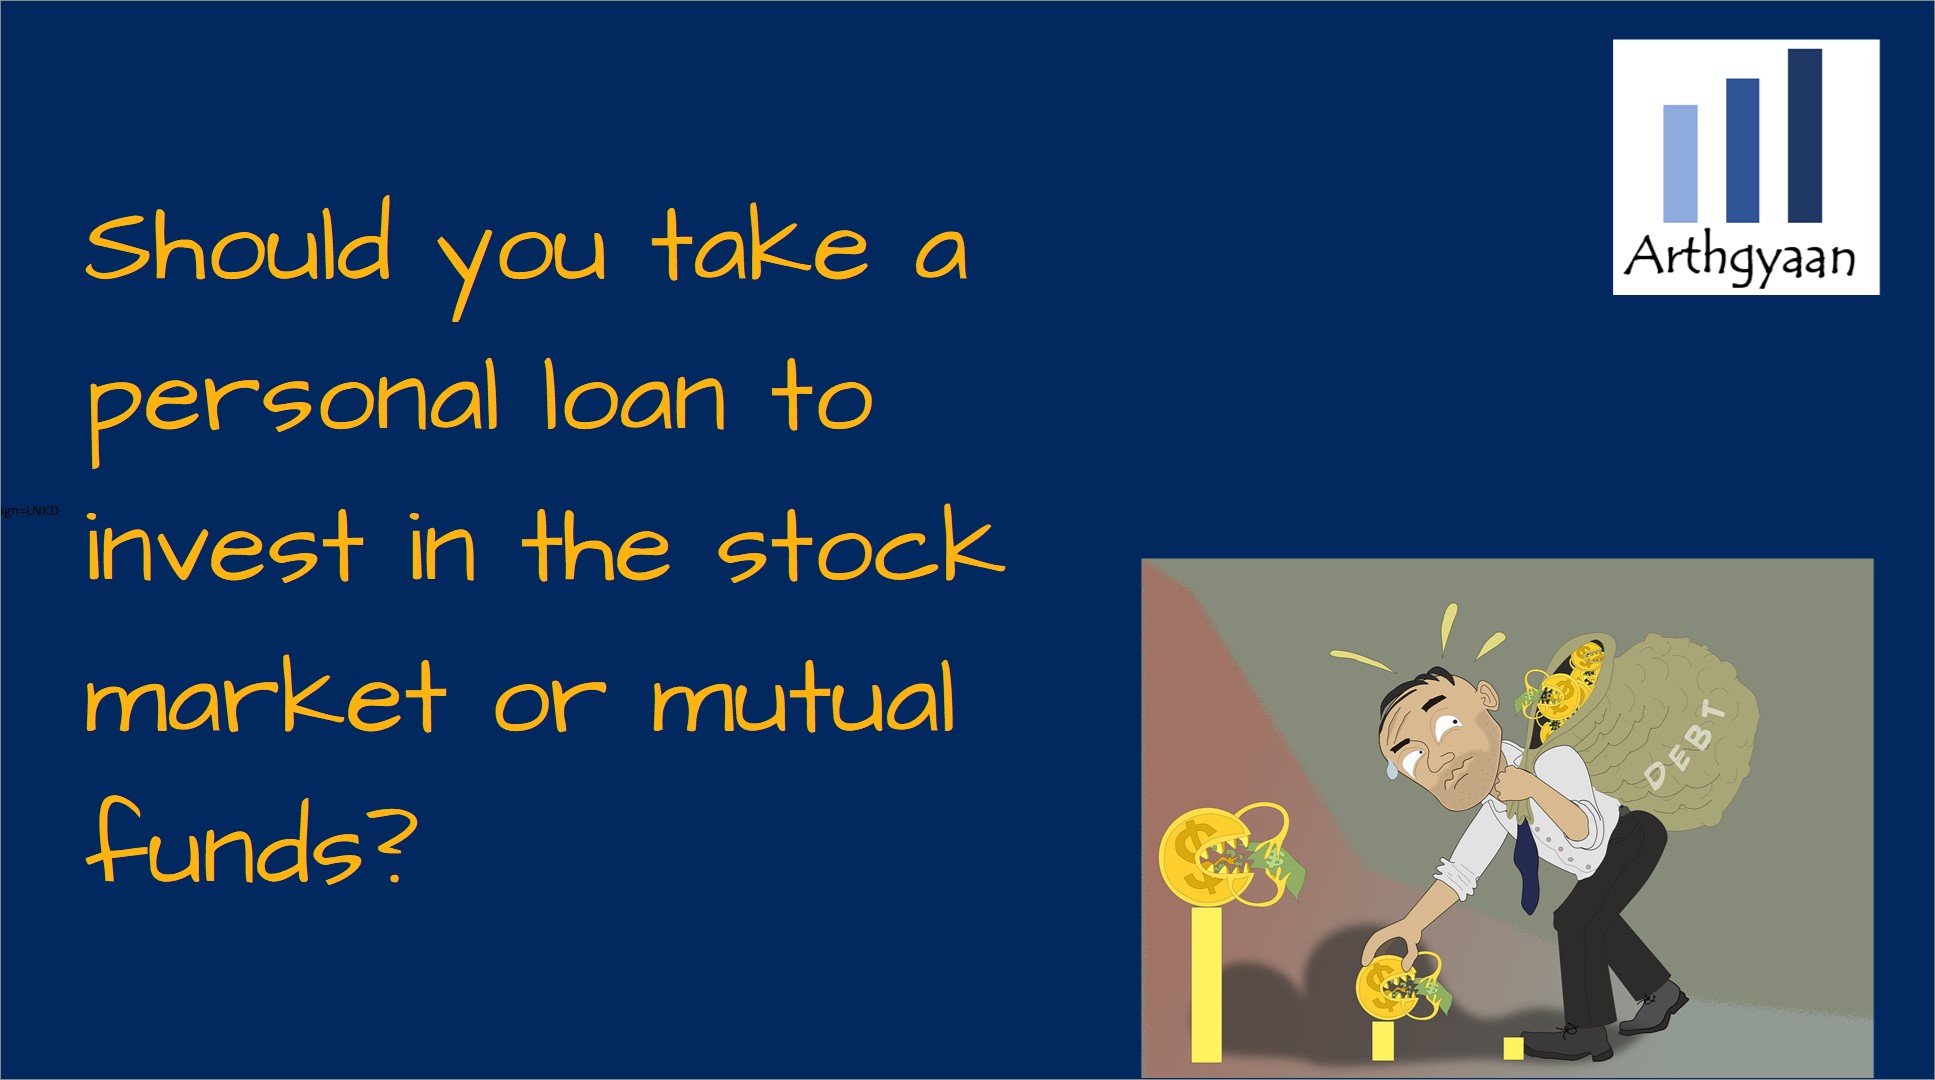 Should you take a personal loan to invest in the stock market or mutual funds?